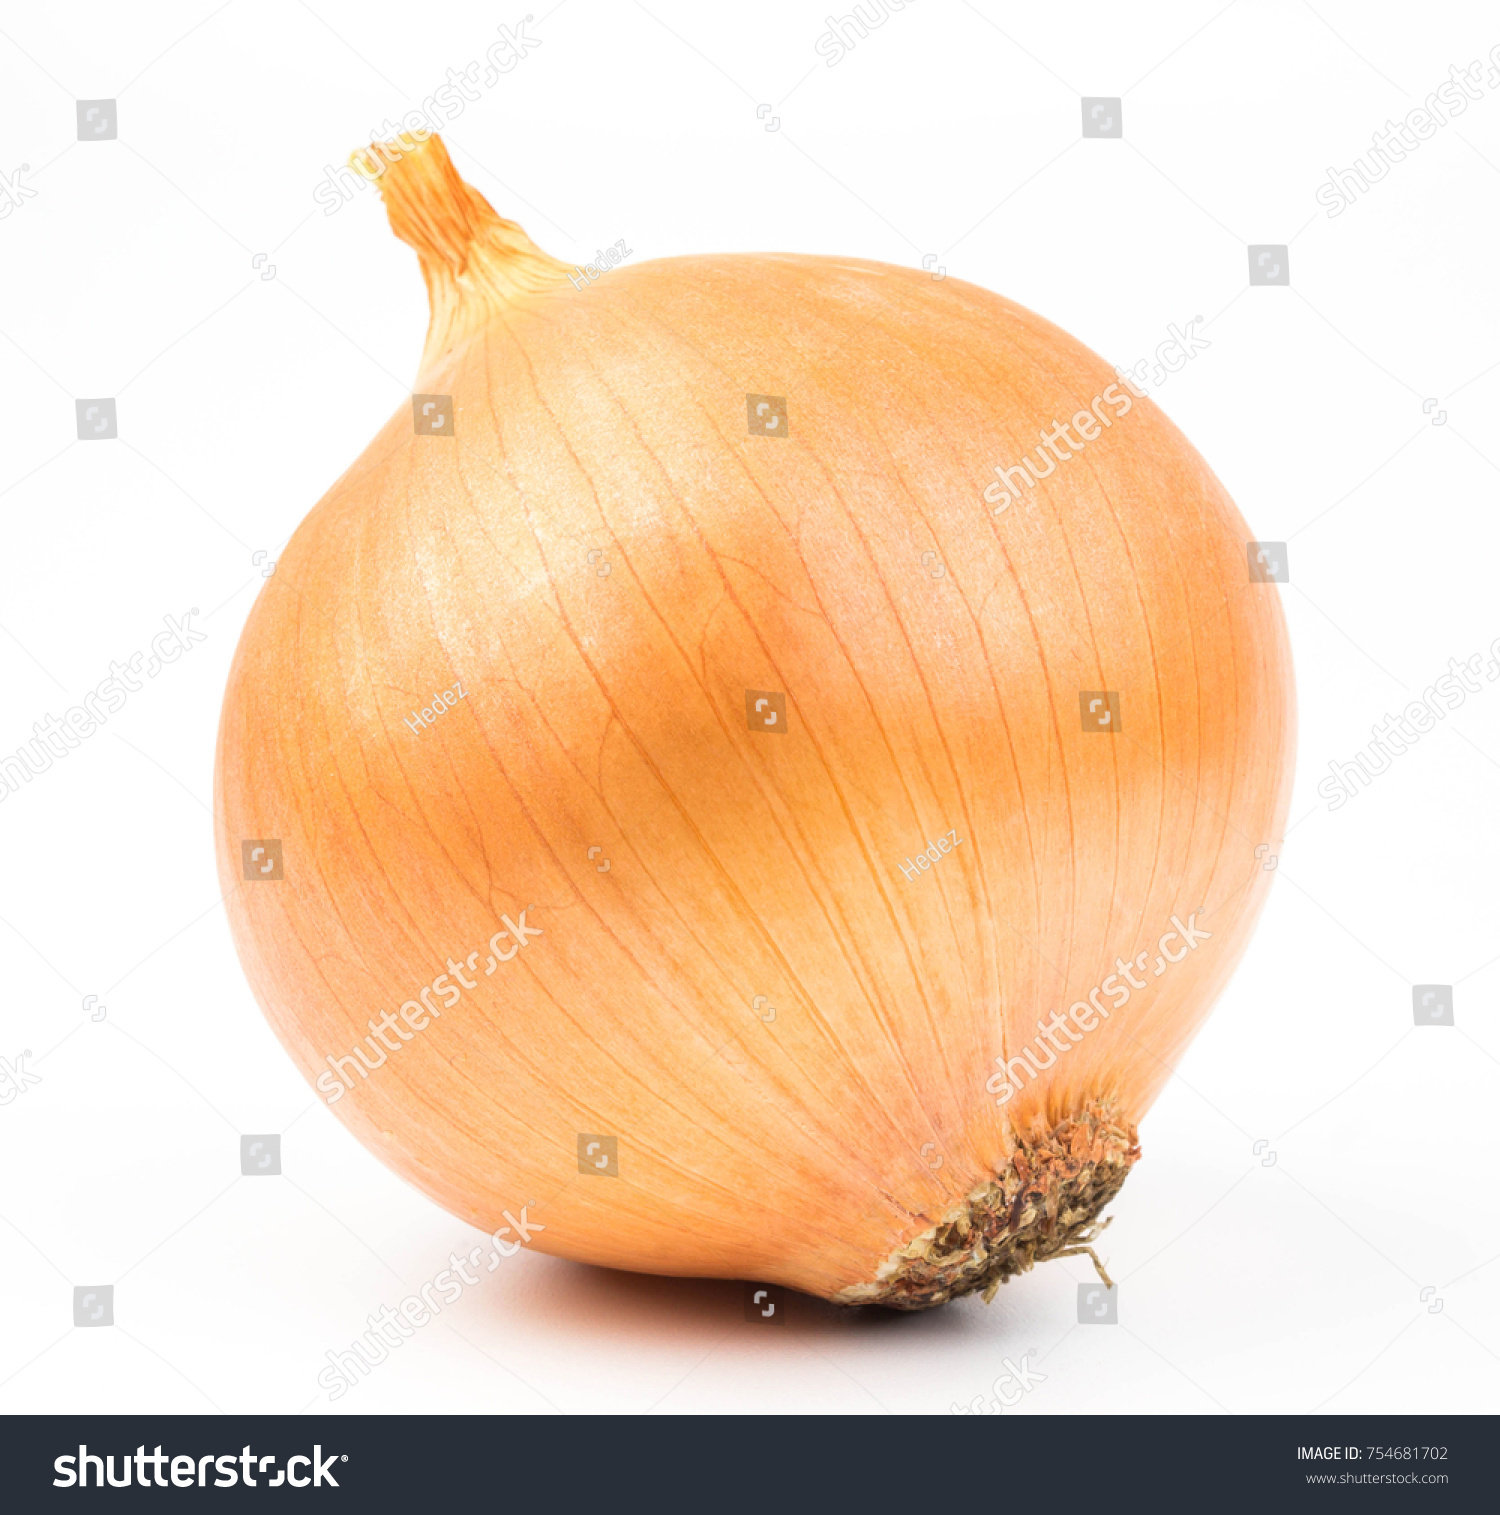 Onions isolated on white background #754681702